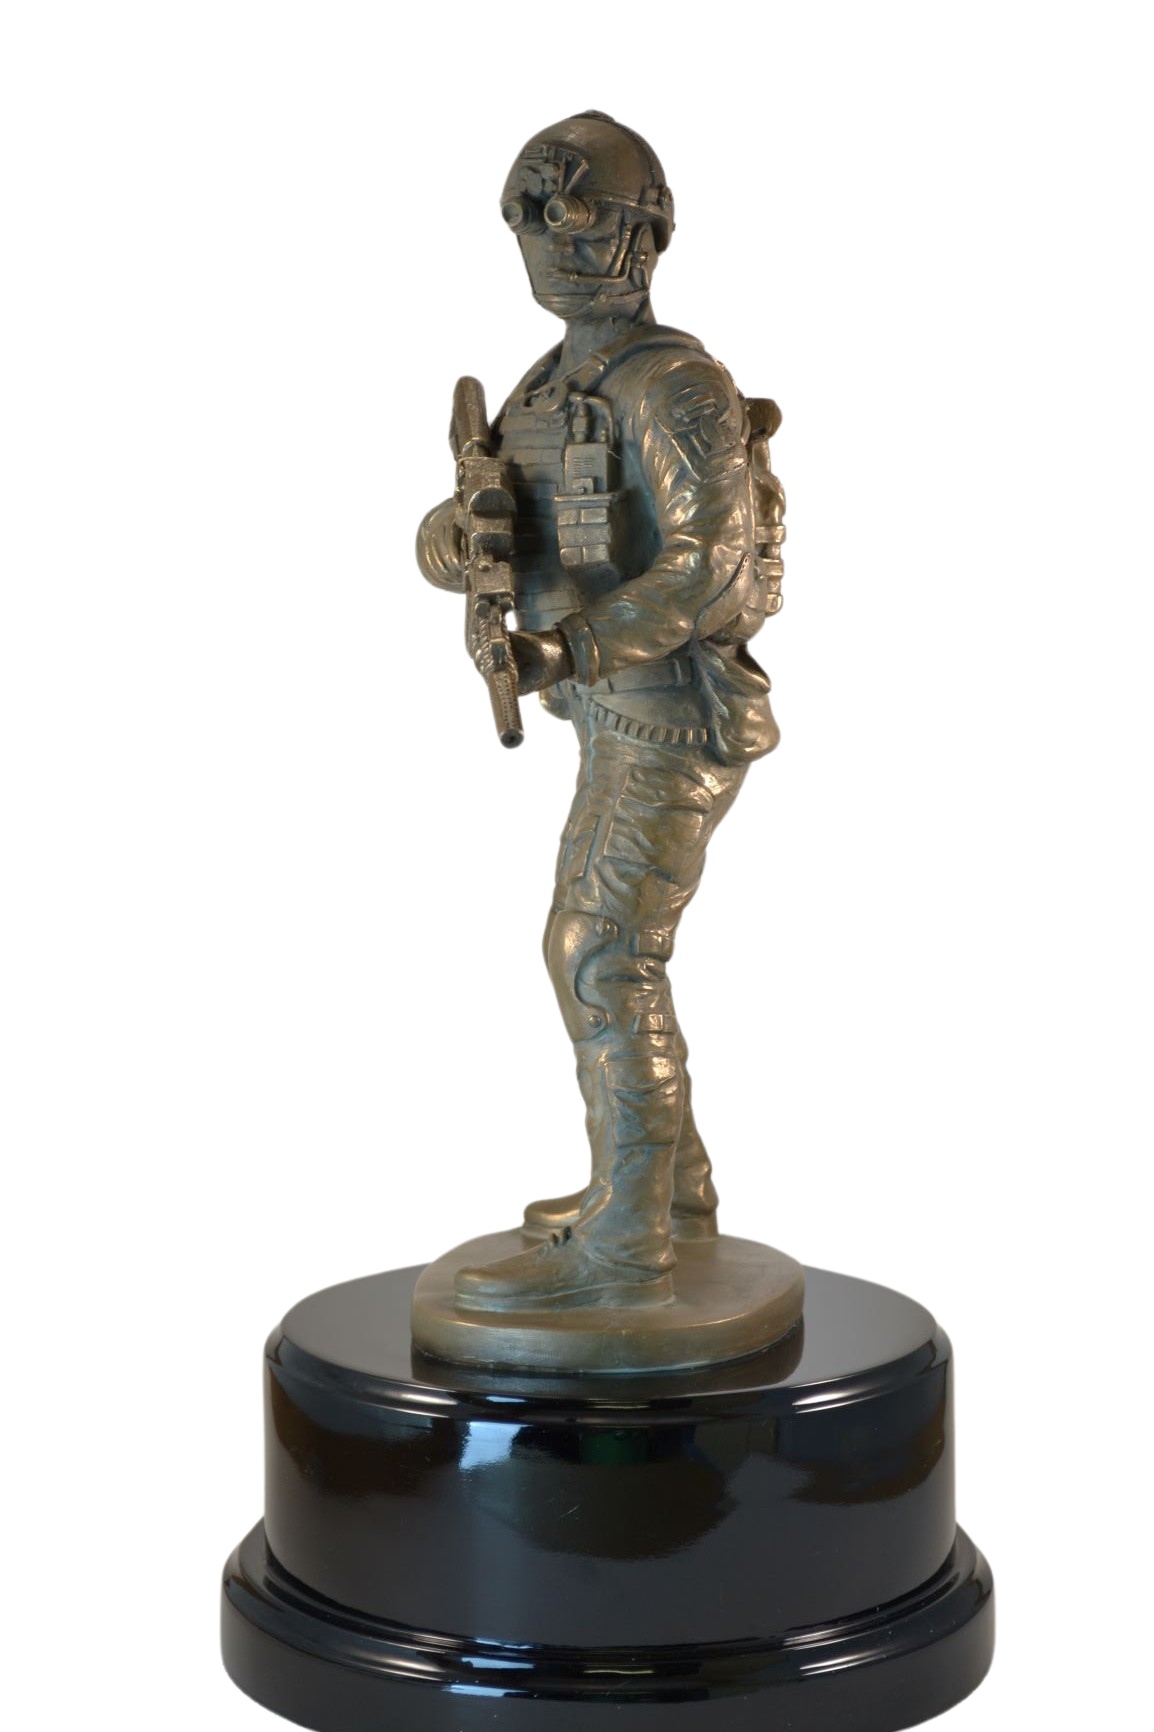 Special Forces Soldier Statue on Round Base